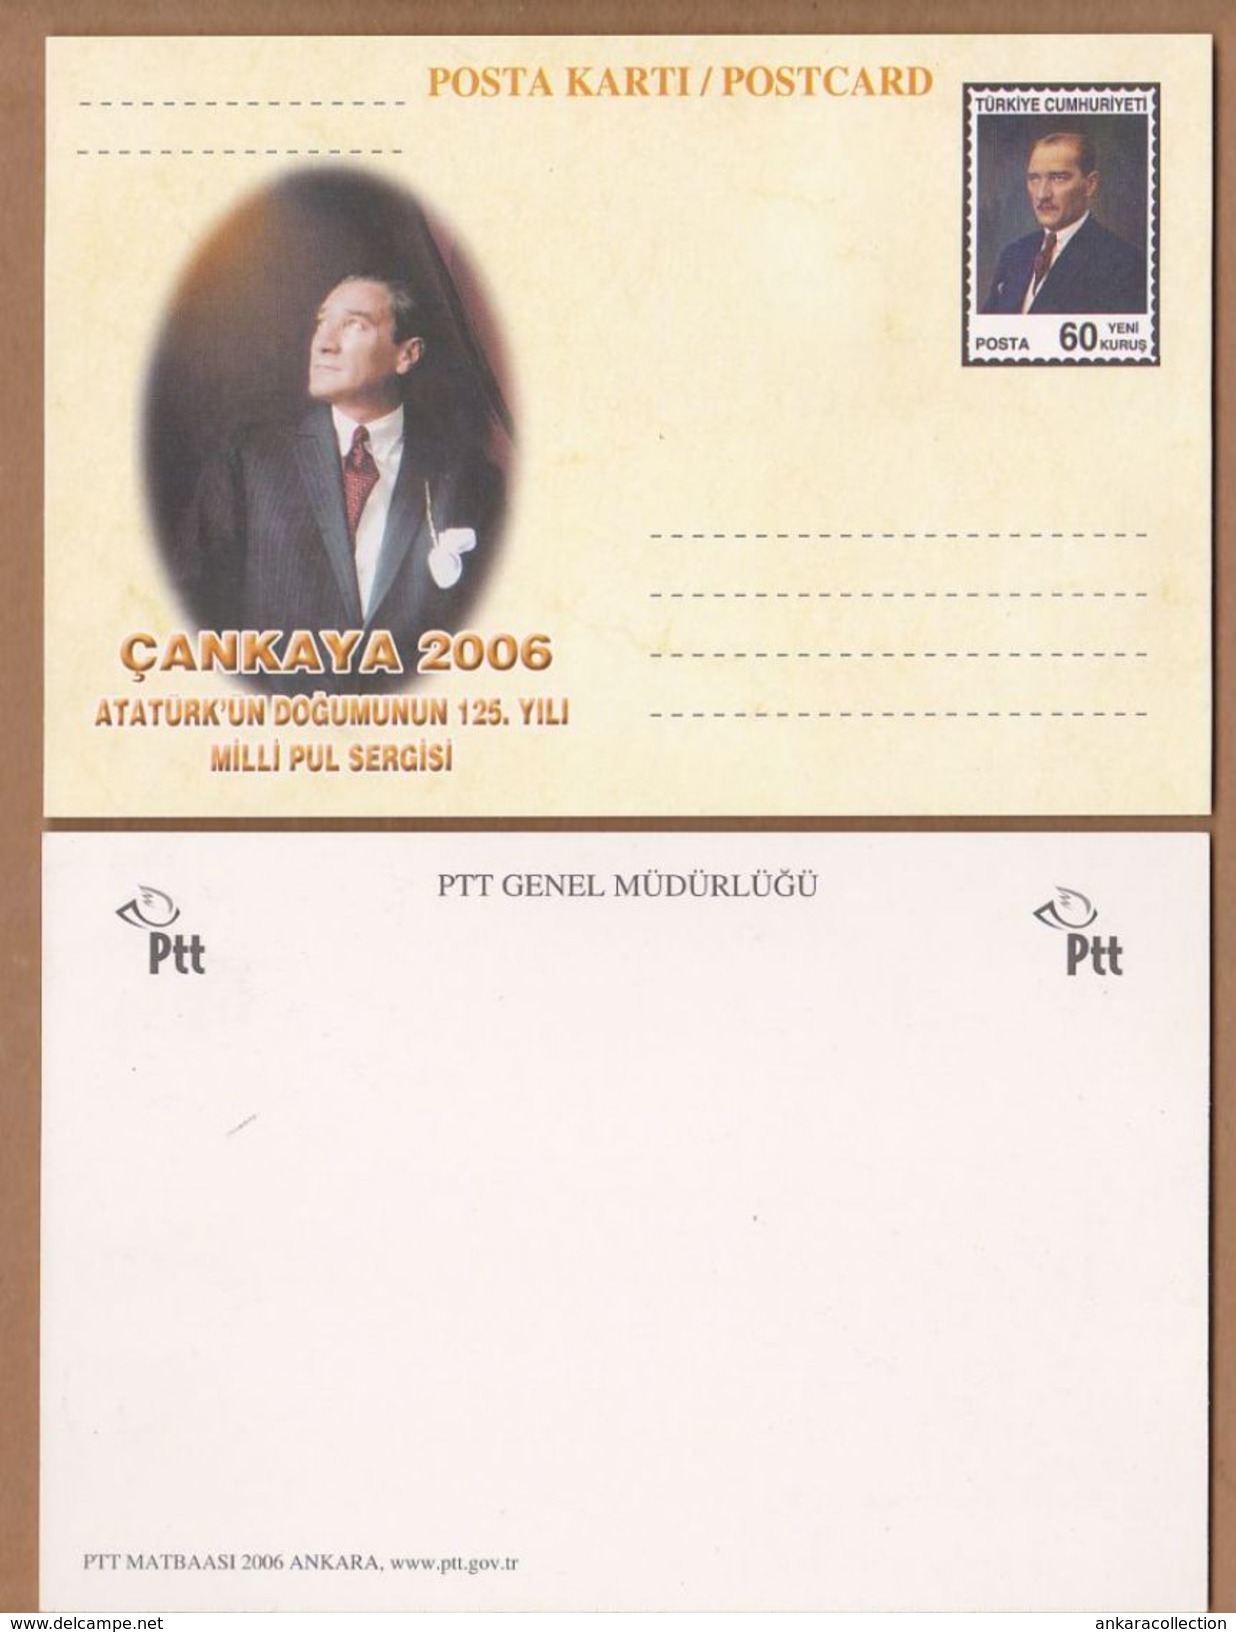 AC - POSTAL STATIONERY - CANKAYA 2006 NATIONAL STAMP EXHIBITION ON THE OCCASION OF THE 125th ANN OF THE BIRTH OF ATATURK - Postal Stationery